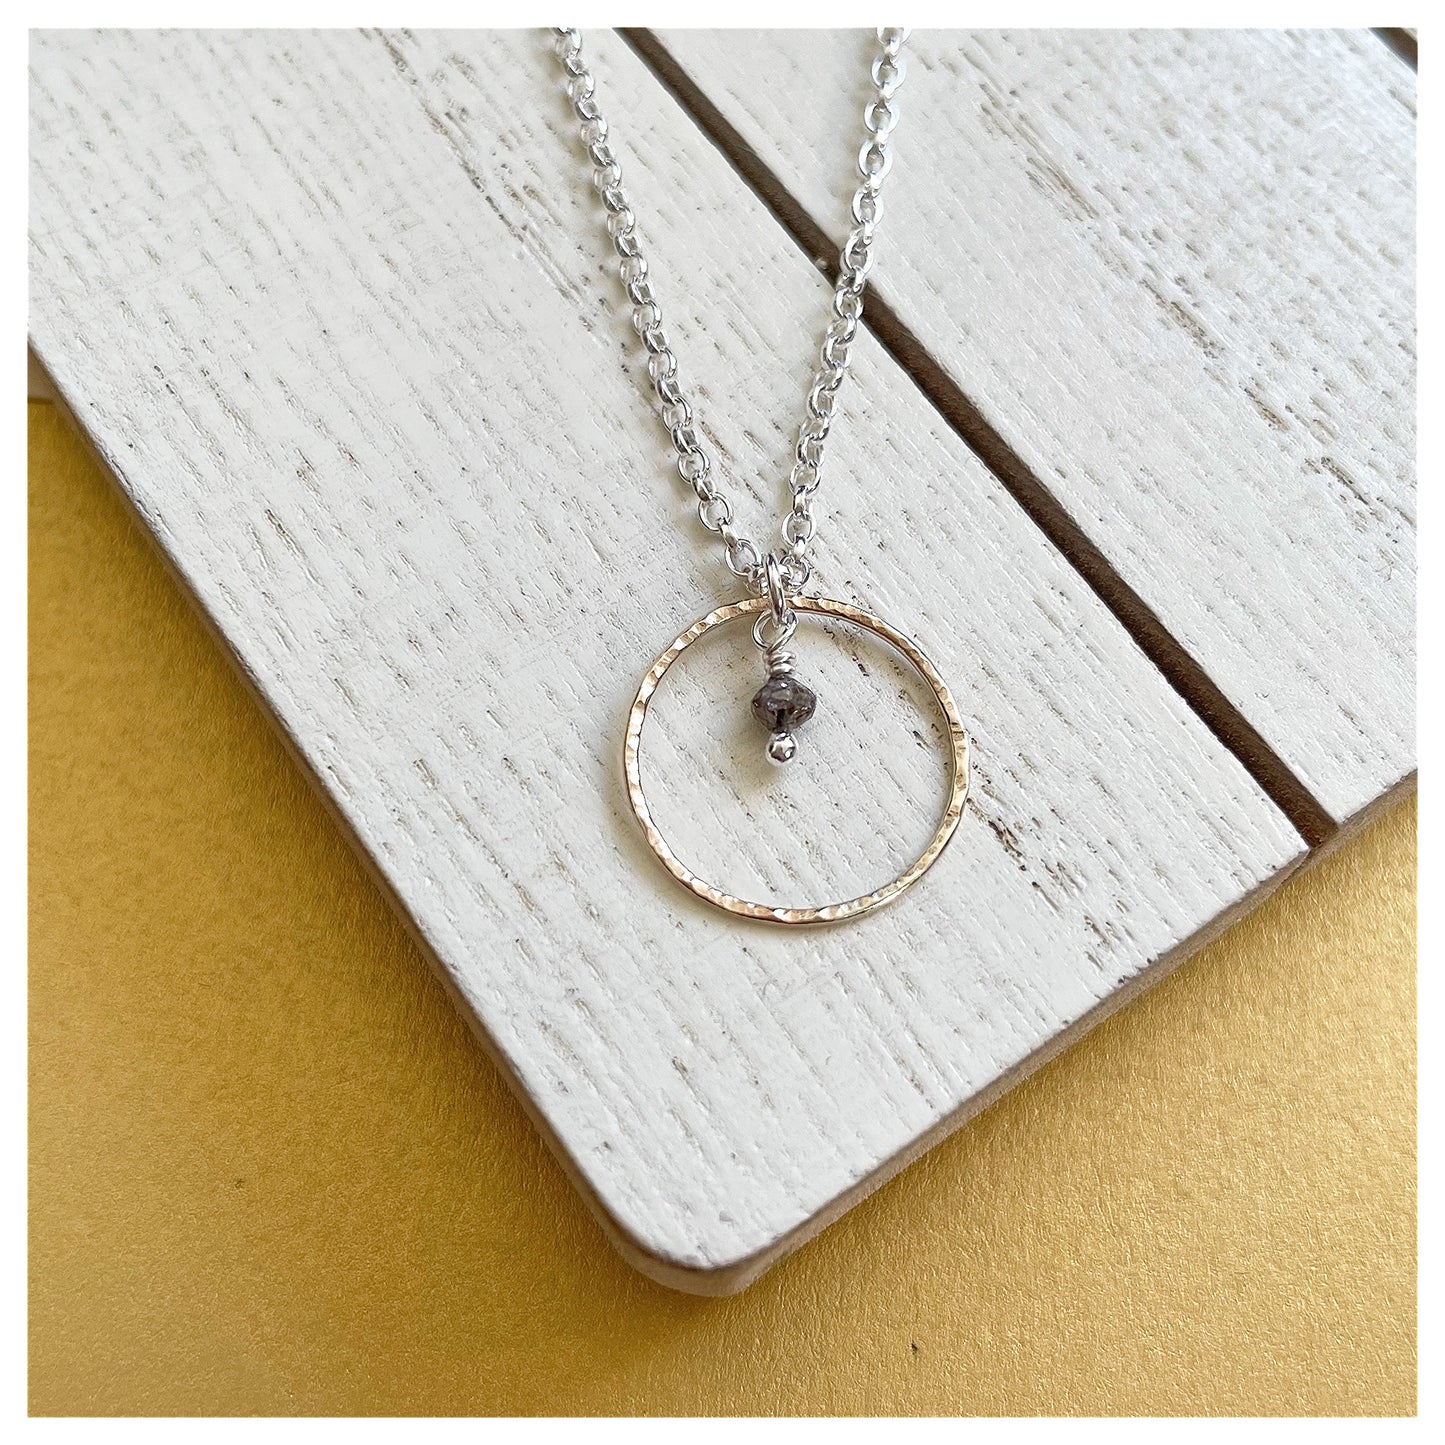 Mini 9ct Yellow Gold Hammered circle, Sterling Silver and Dark Grey Diamond Bead Necklace.